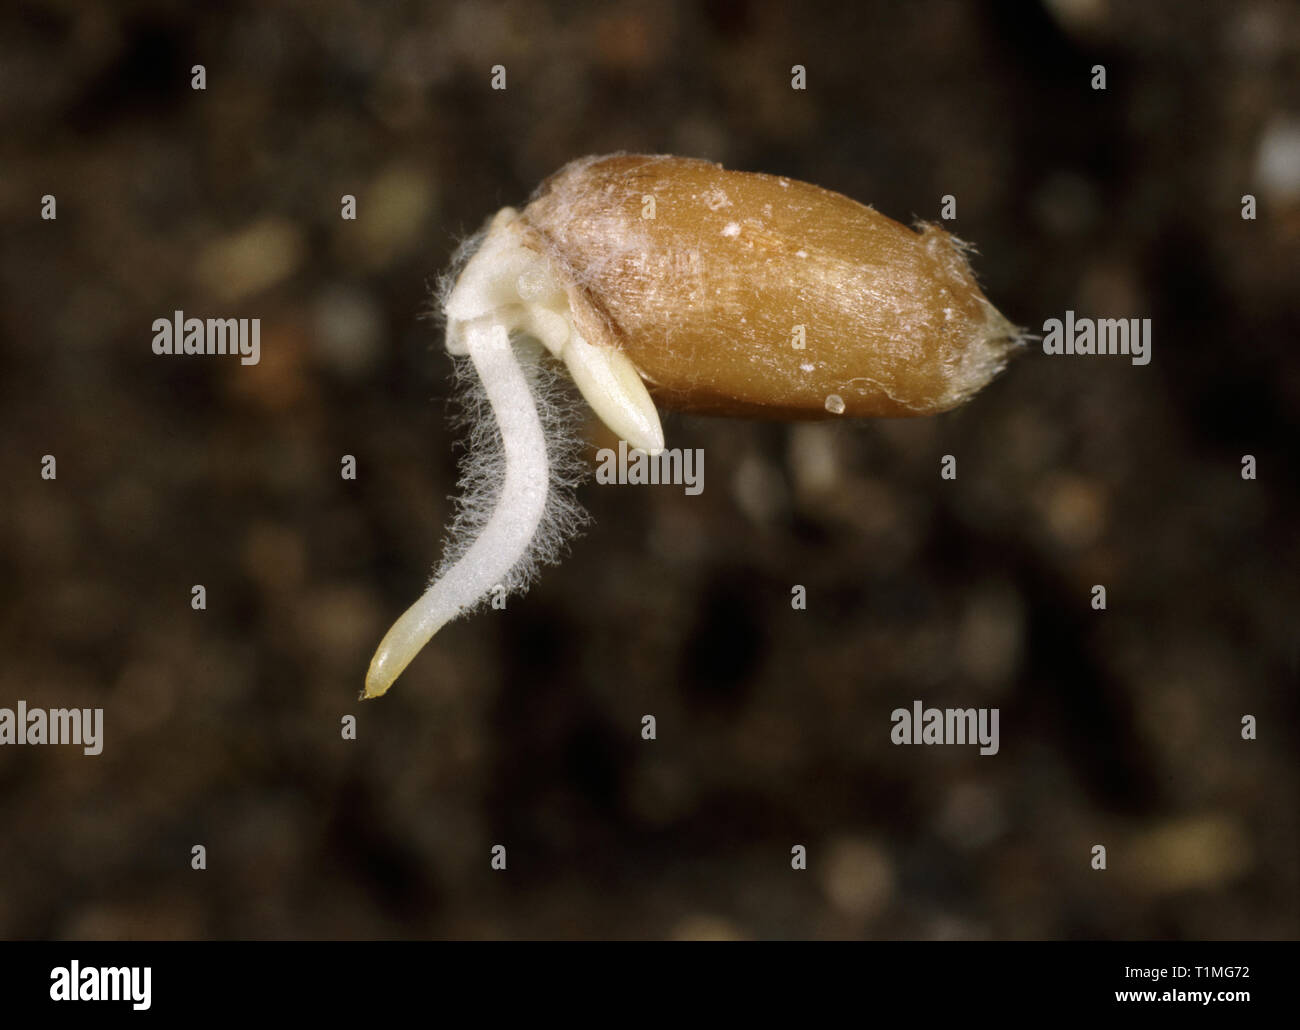 Germinating wheat seed with root (radicle), coleorhiza, and root hairs and coleoptile just emerging Stock Photo